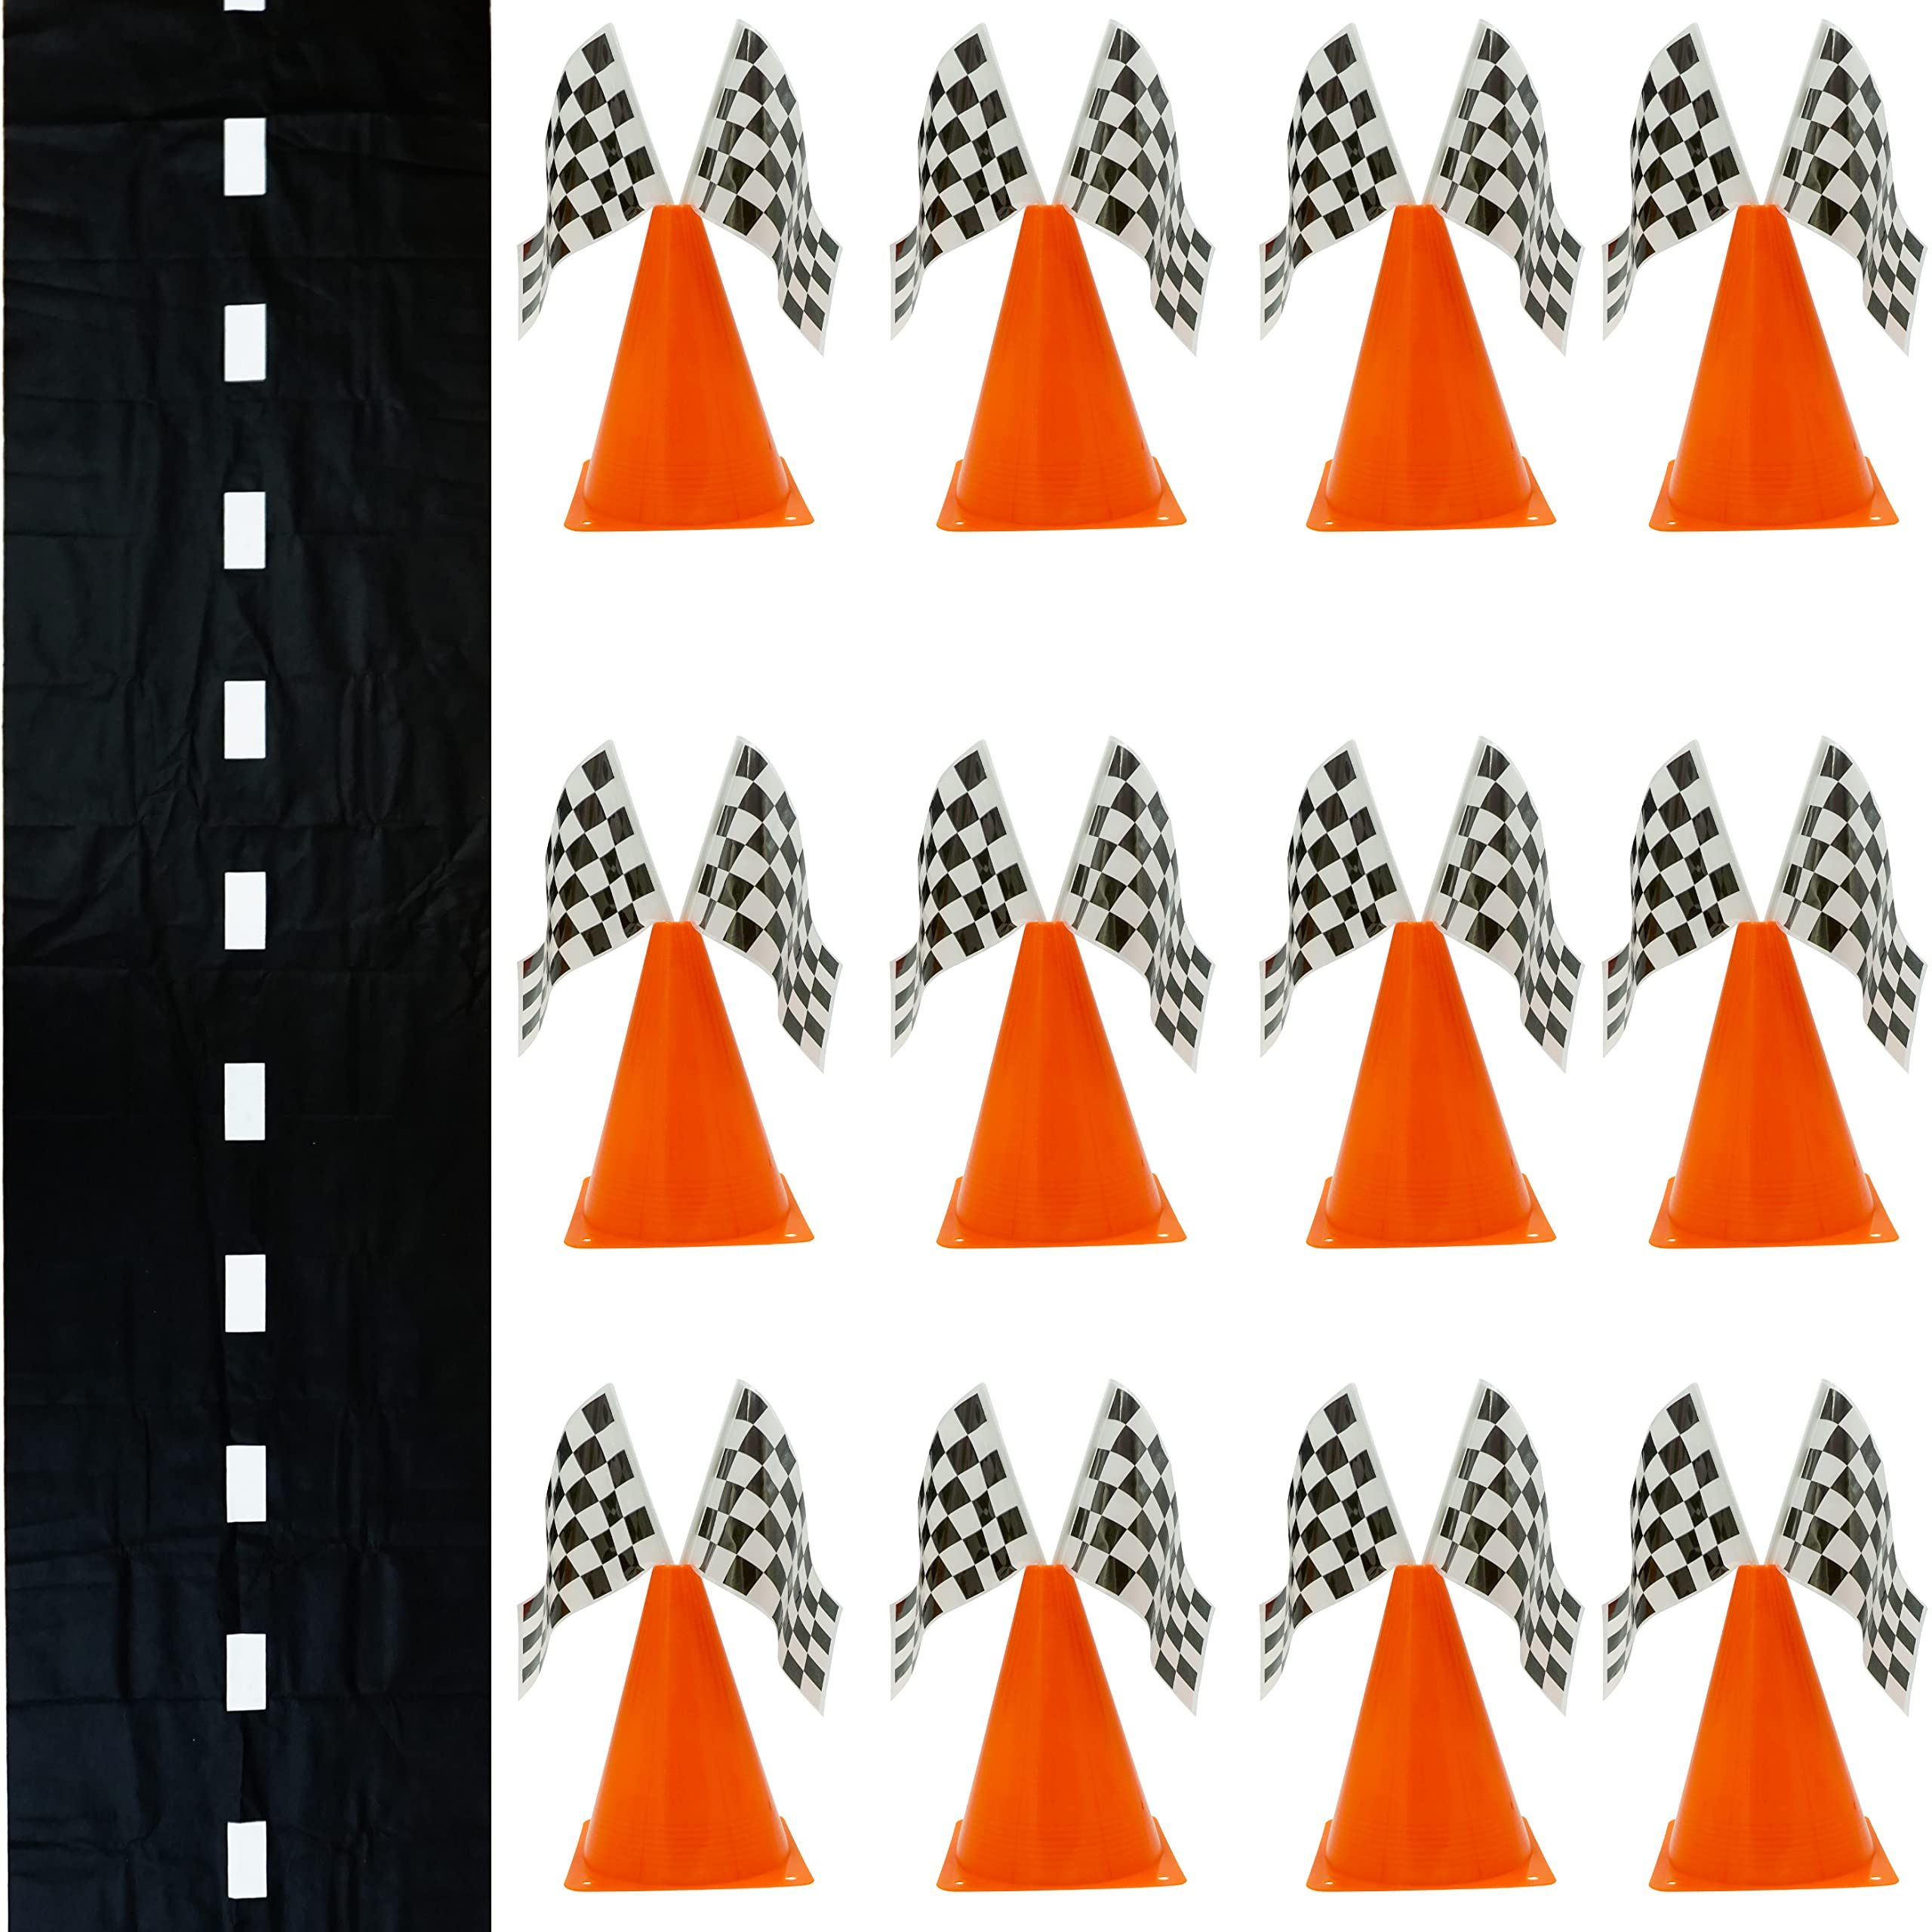 38 Pcs Set - 12 Traffic Cones With Hole on Top, 24 Checkered Flags, Racetrack Floor Runner - for For | Amazon (US)